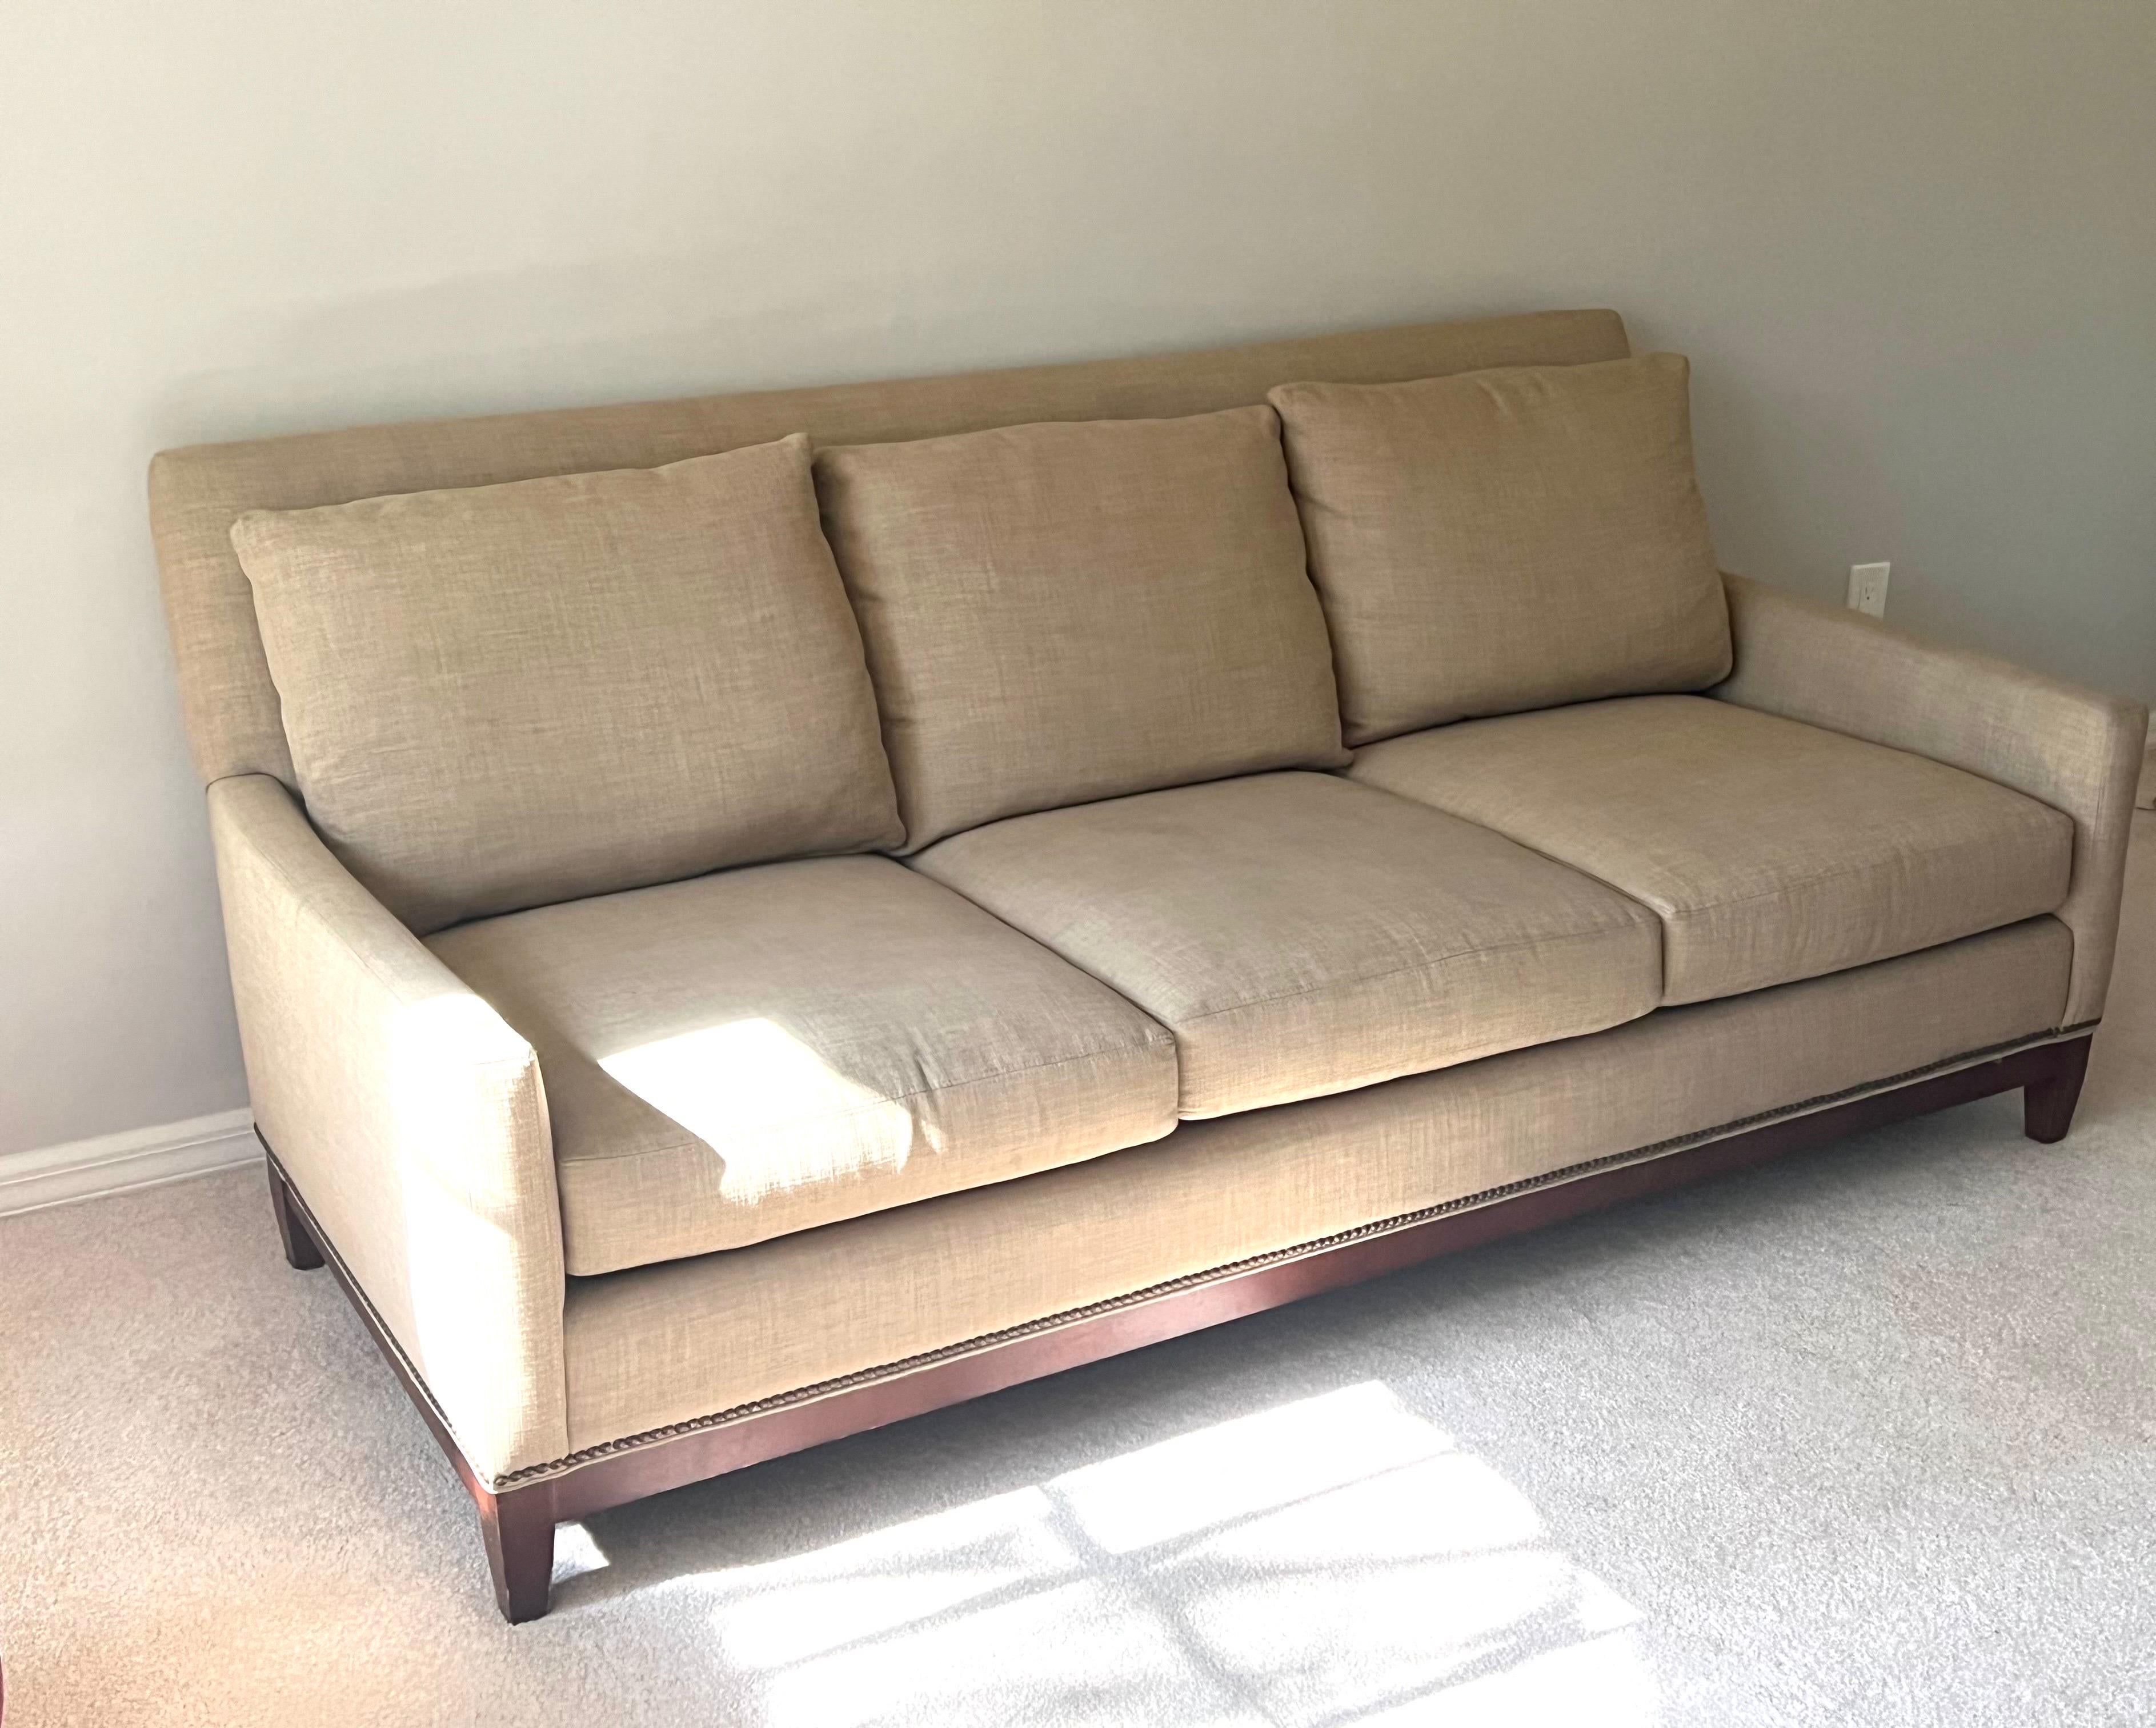 Sober and Elegant French Mid-Century Modern Sofa / Couch in the style of France's most important 20th Century designer, Jean Michel Frank. The 3 seat sofa has a timeless, perfectly balanced form and pure lines and is consistent with Frank's